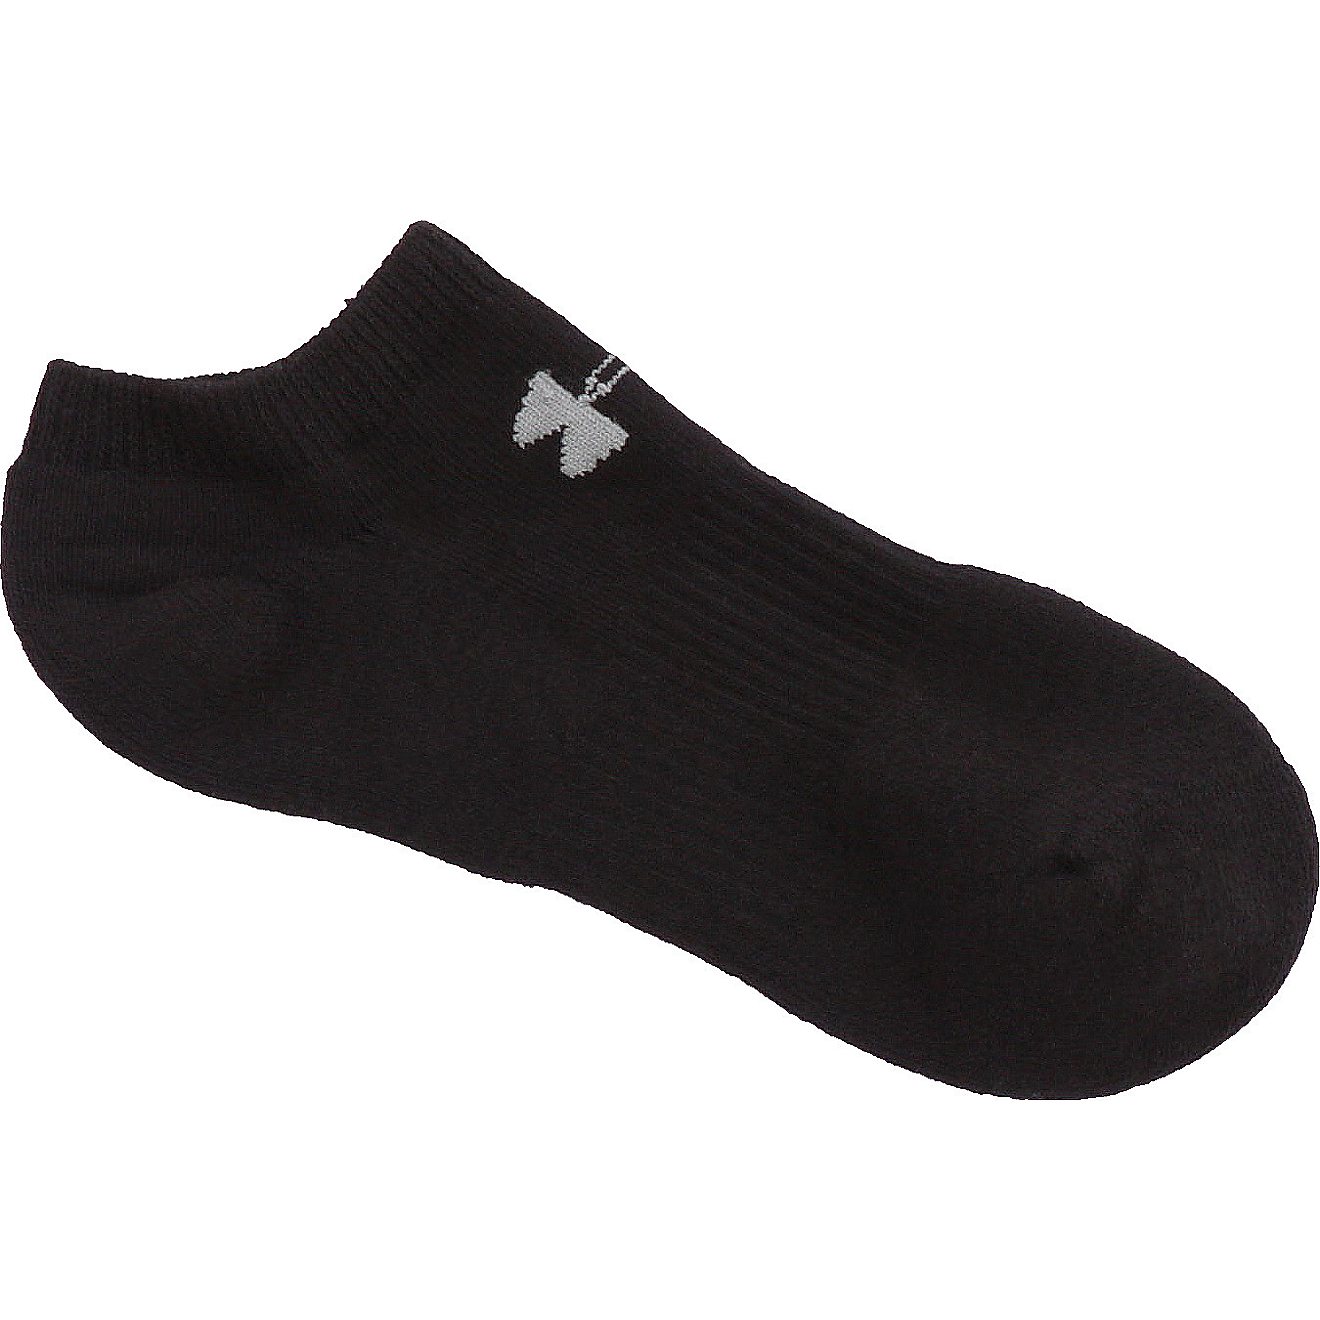 Under Armour 1298697 Men's UA Charged Cotton 2.0 No Show Socks 6 Pack Size 9-15